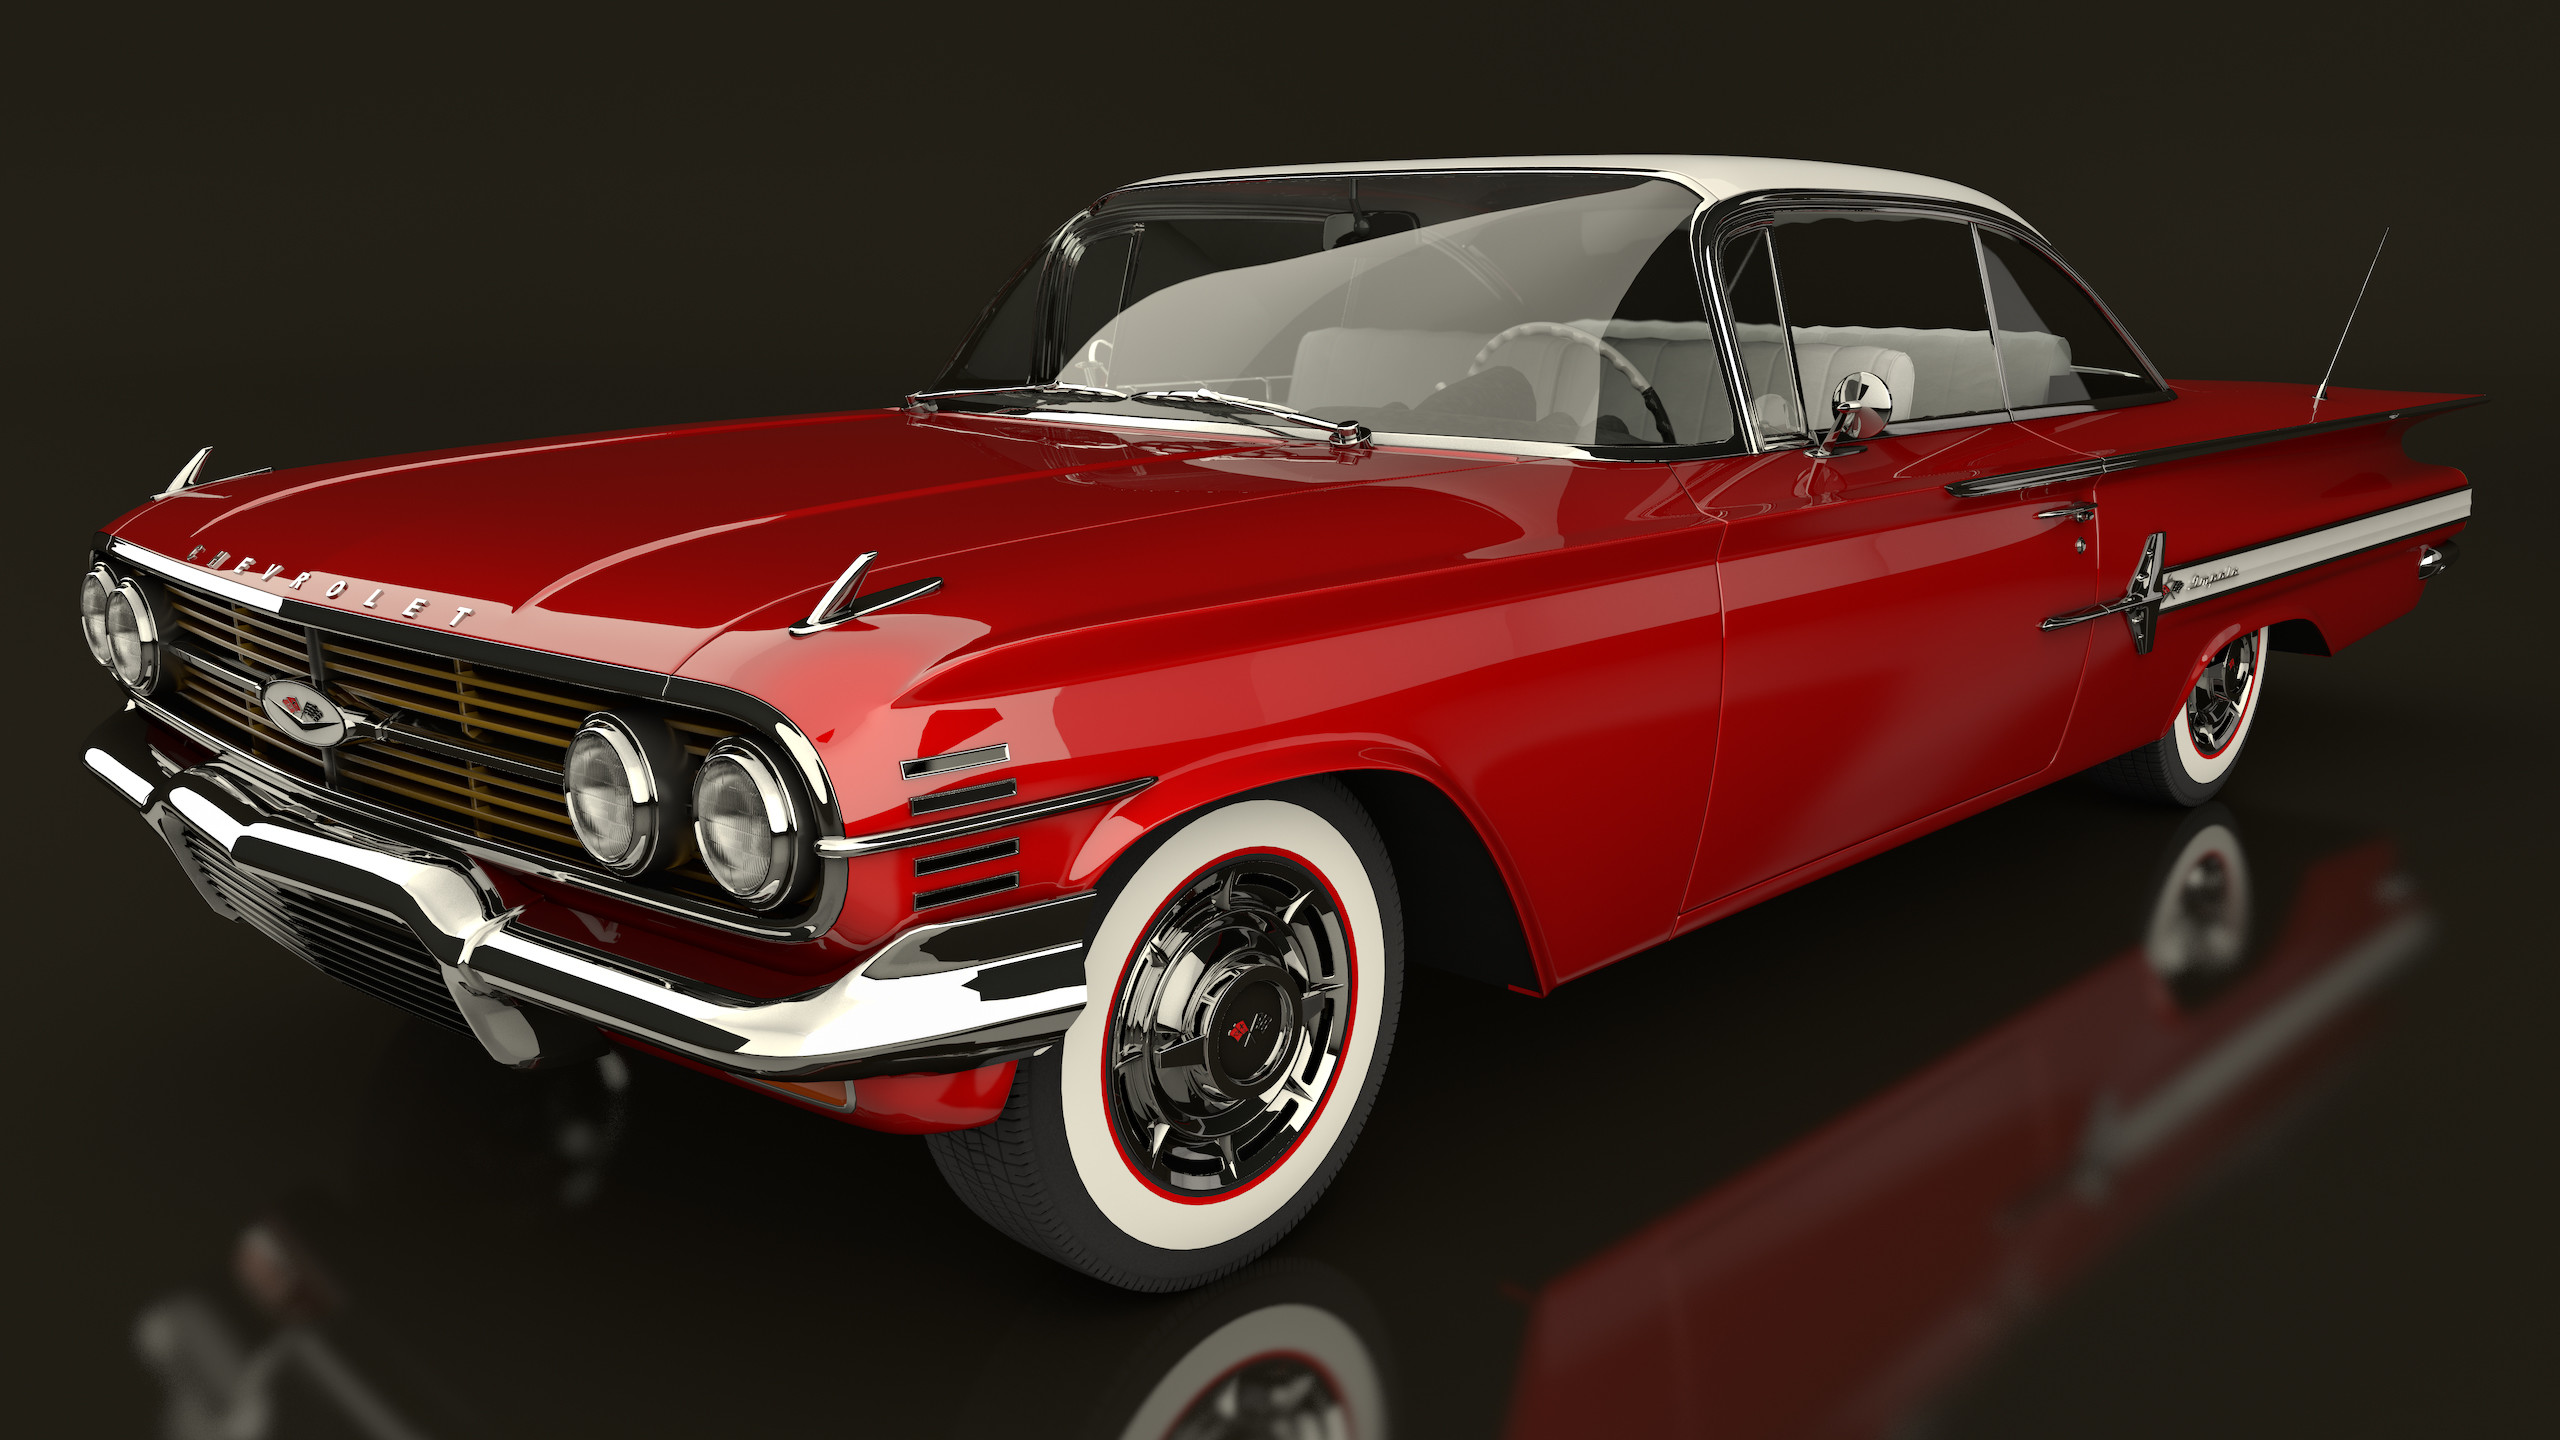 2560x1440 1960 Chevrolet Impala by SamCurry 1960 Chevrolet Impala by SamCurry